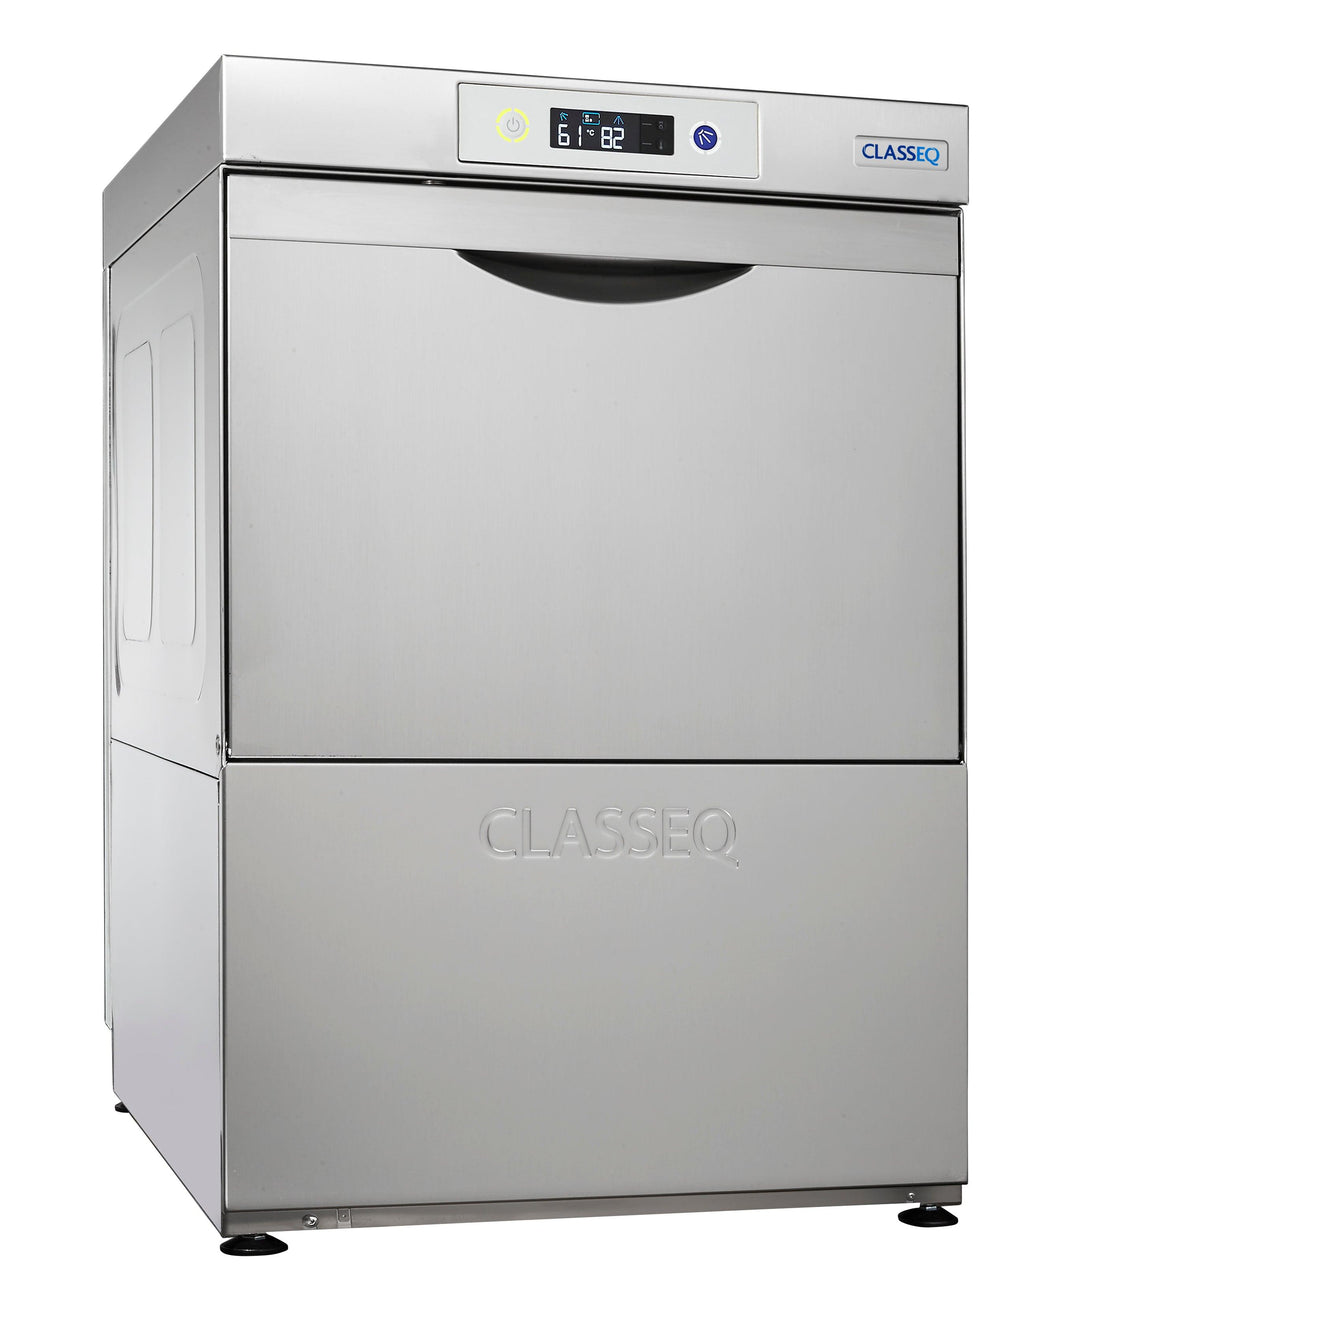 G500 Gravity Drain Classeq Glass Washer - Clear Cool